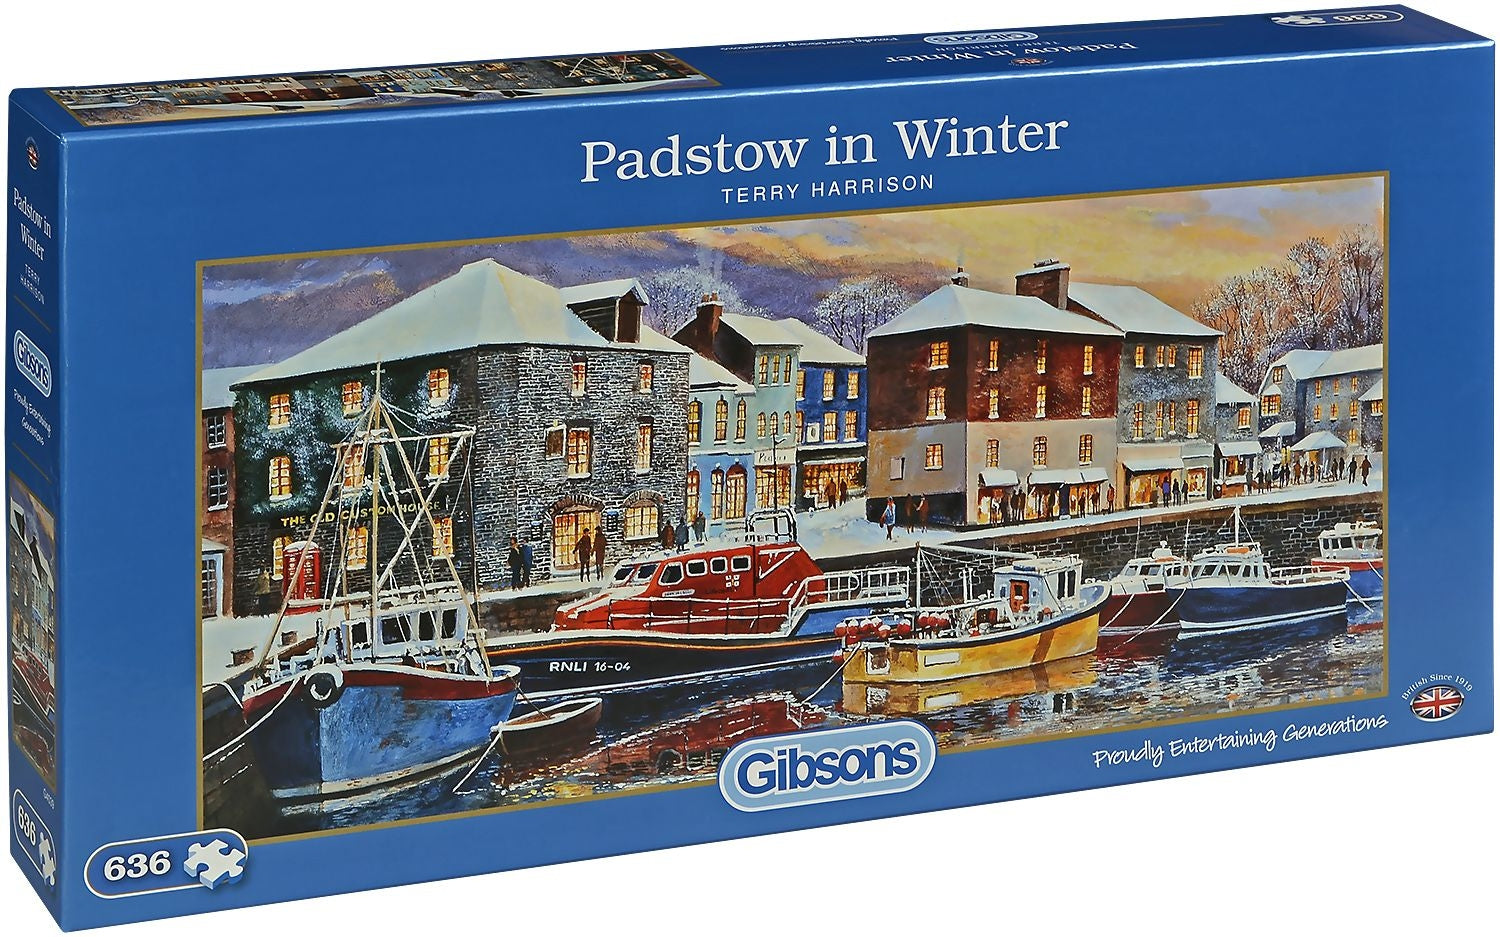 Padstow in Winter 636pc - Gibsons